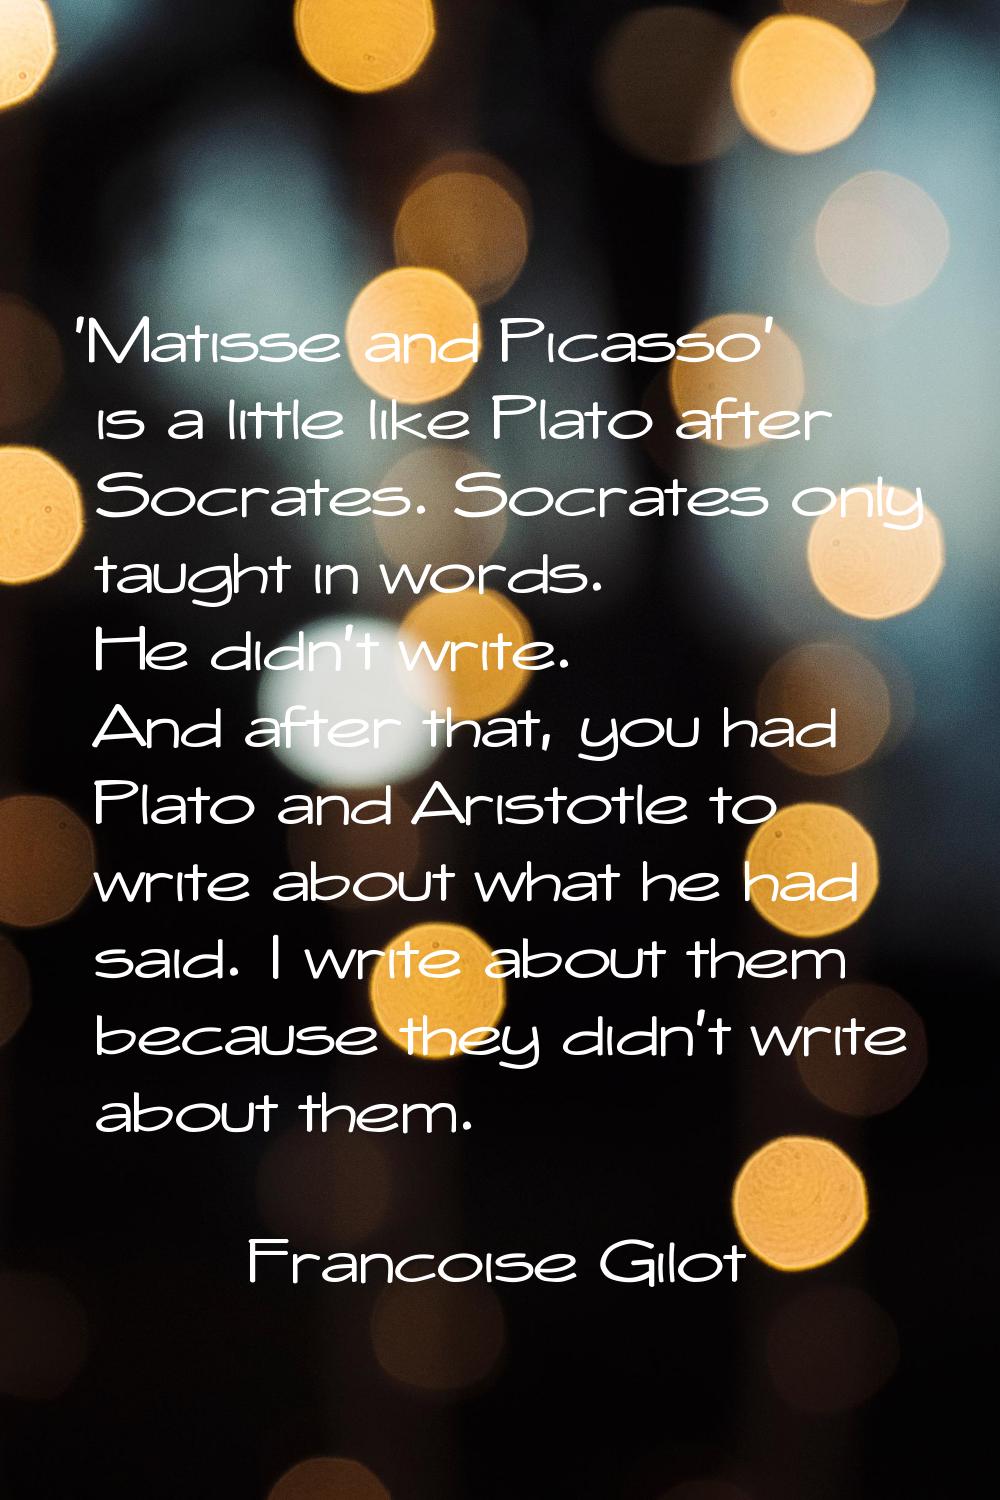 'Matisse and Picasso' is a little like Plato after Socrates. Socrates only taught in words. He didn